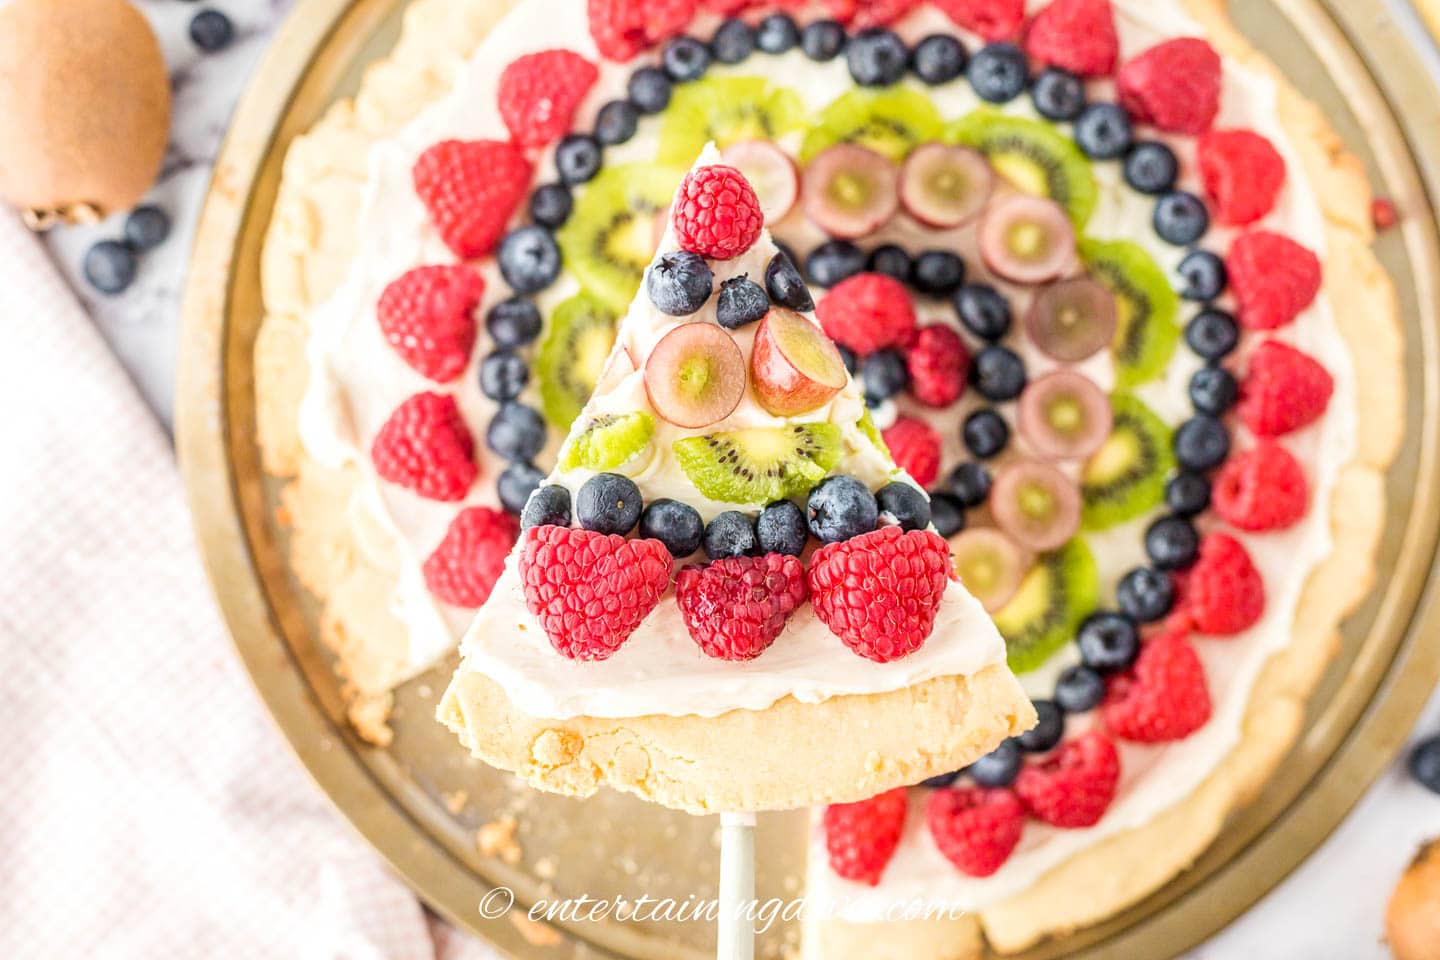 A slice of fruit pizza topped with raspberries, blueberries, kiwi and grapes being held above the rest of the pizza